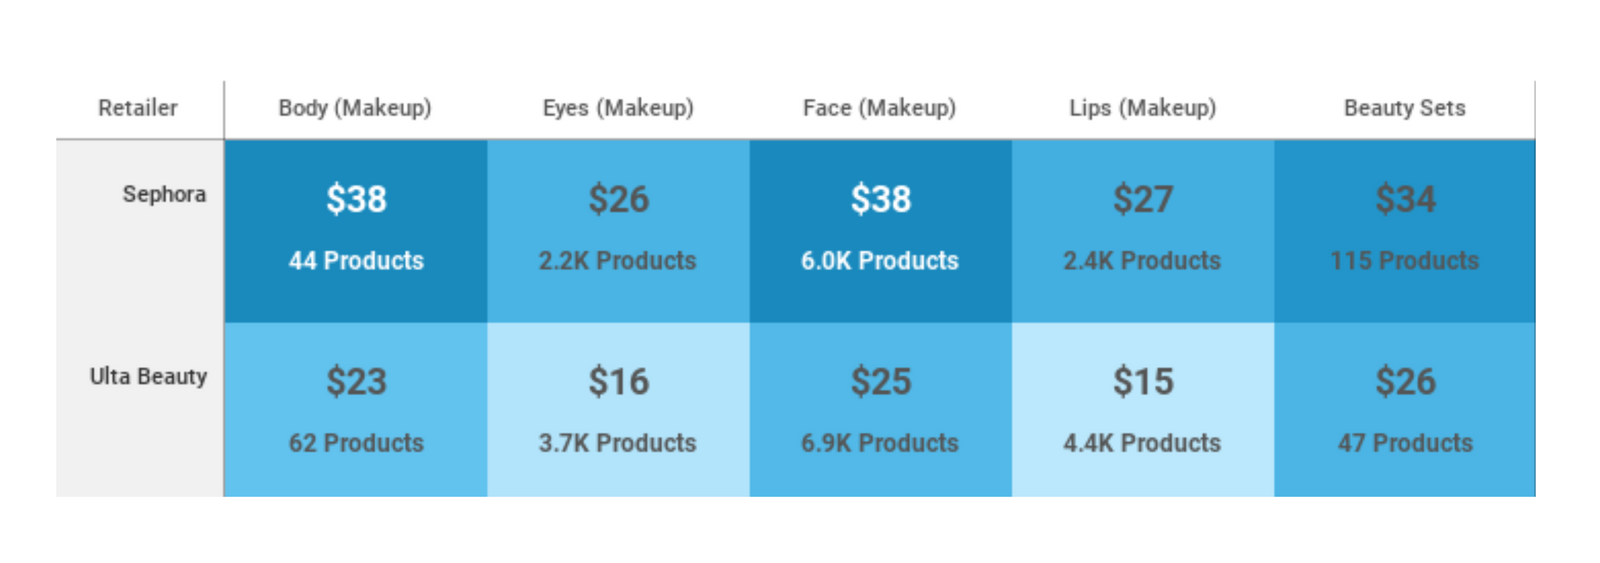 pricing architecture makeup